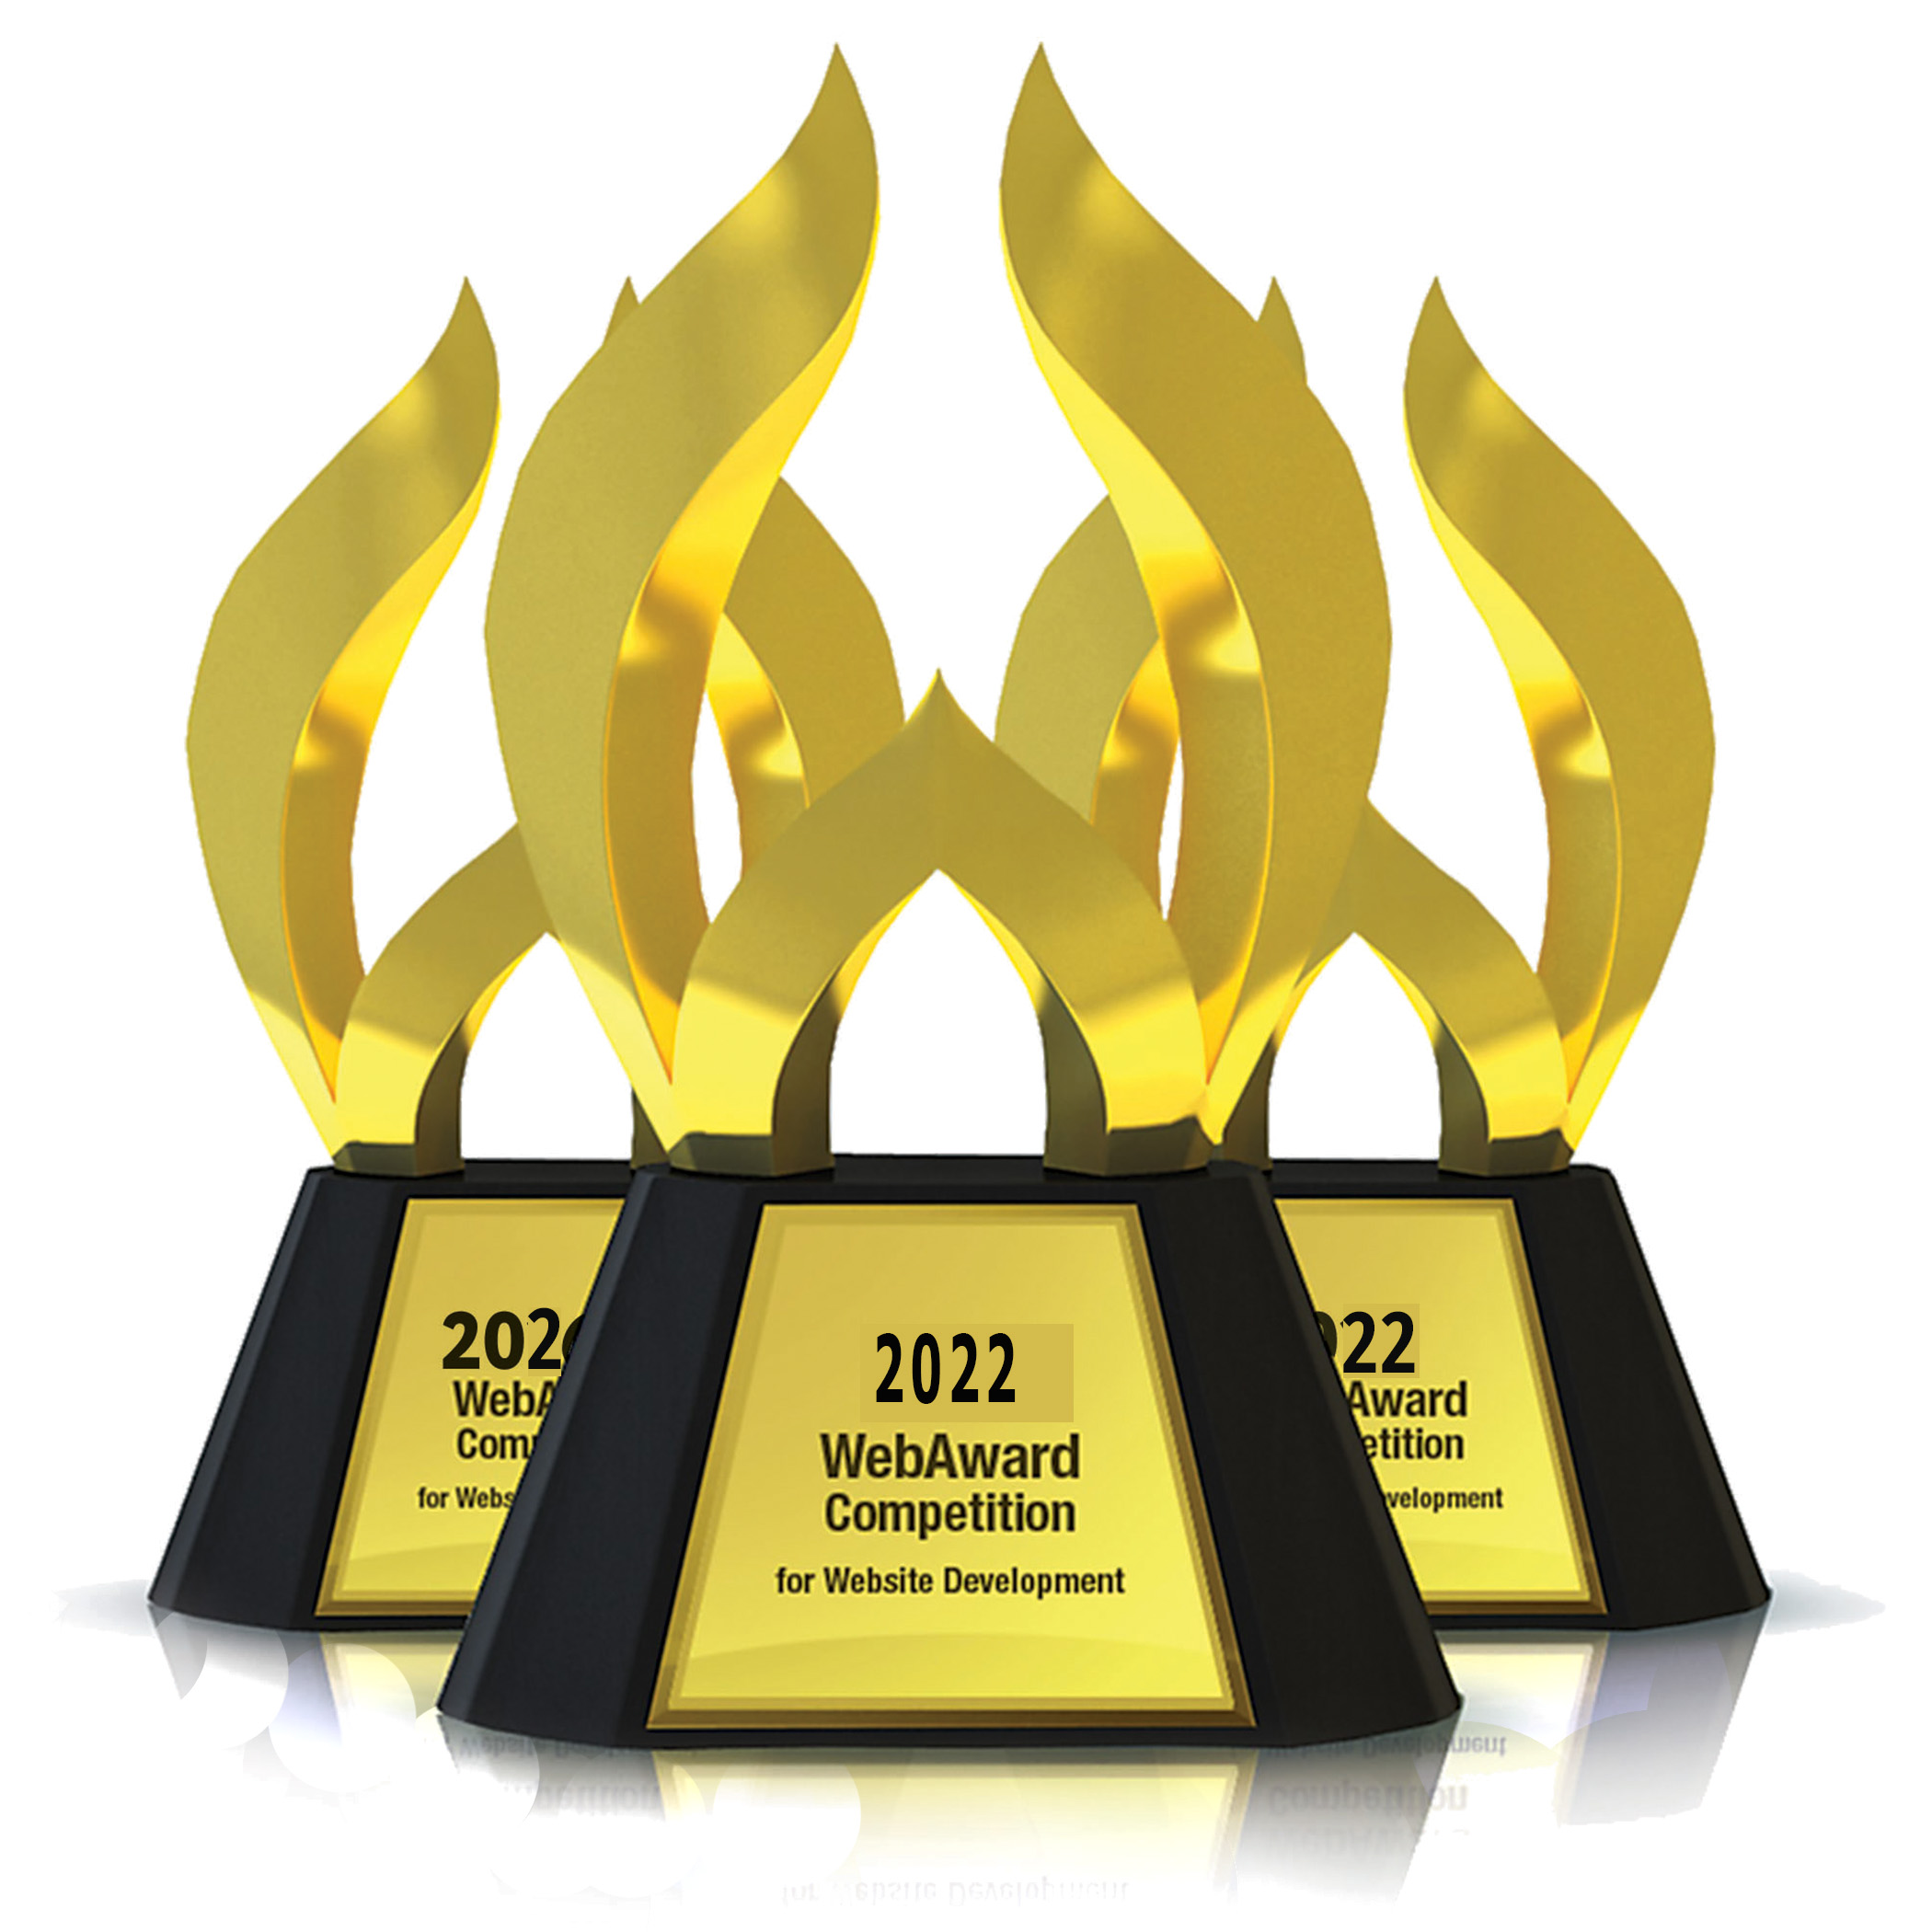 Best Legal Web Site to be Named by Web Marketing Association in 26th Annual WebAward Competition